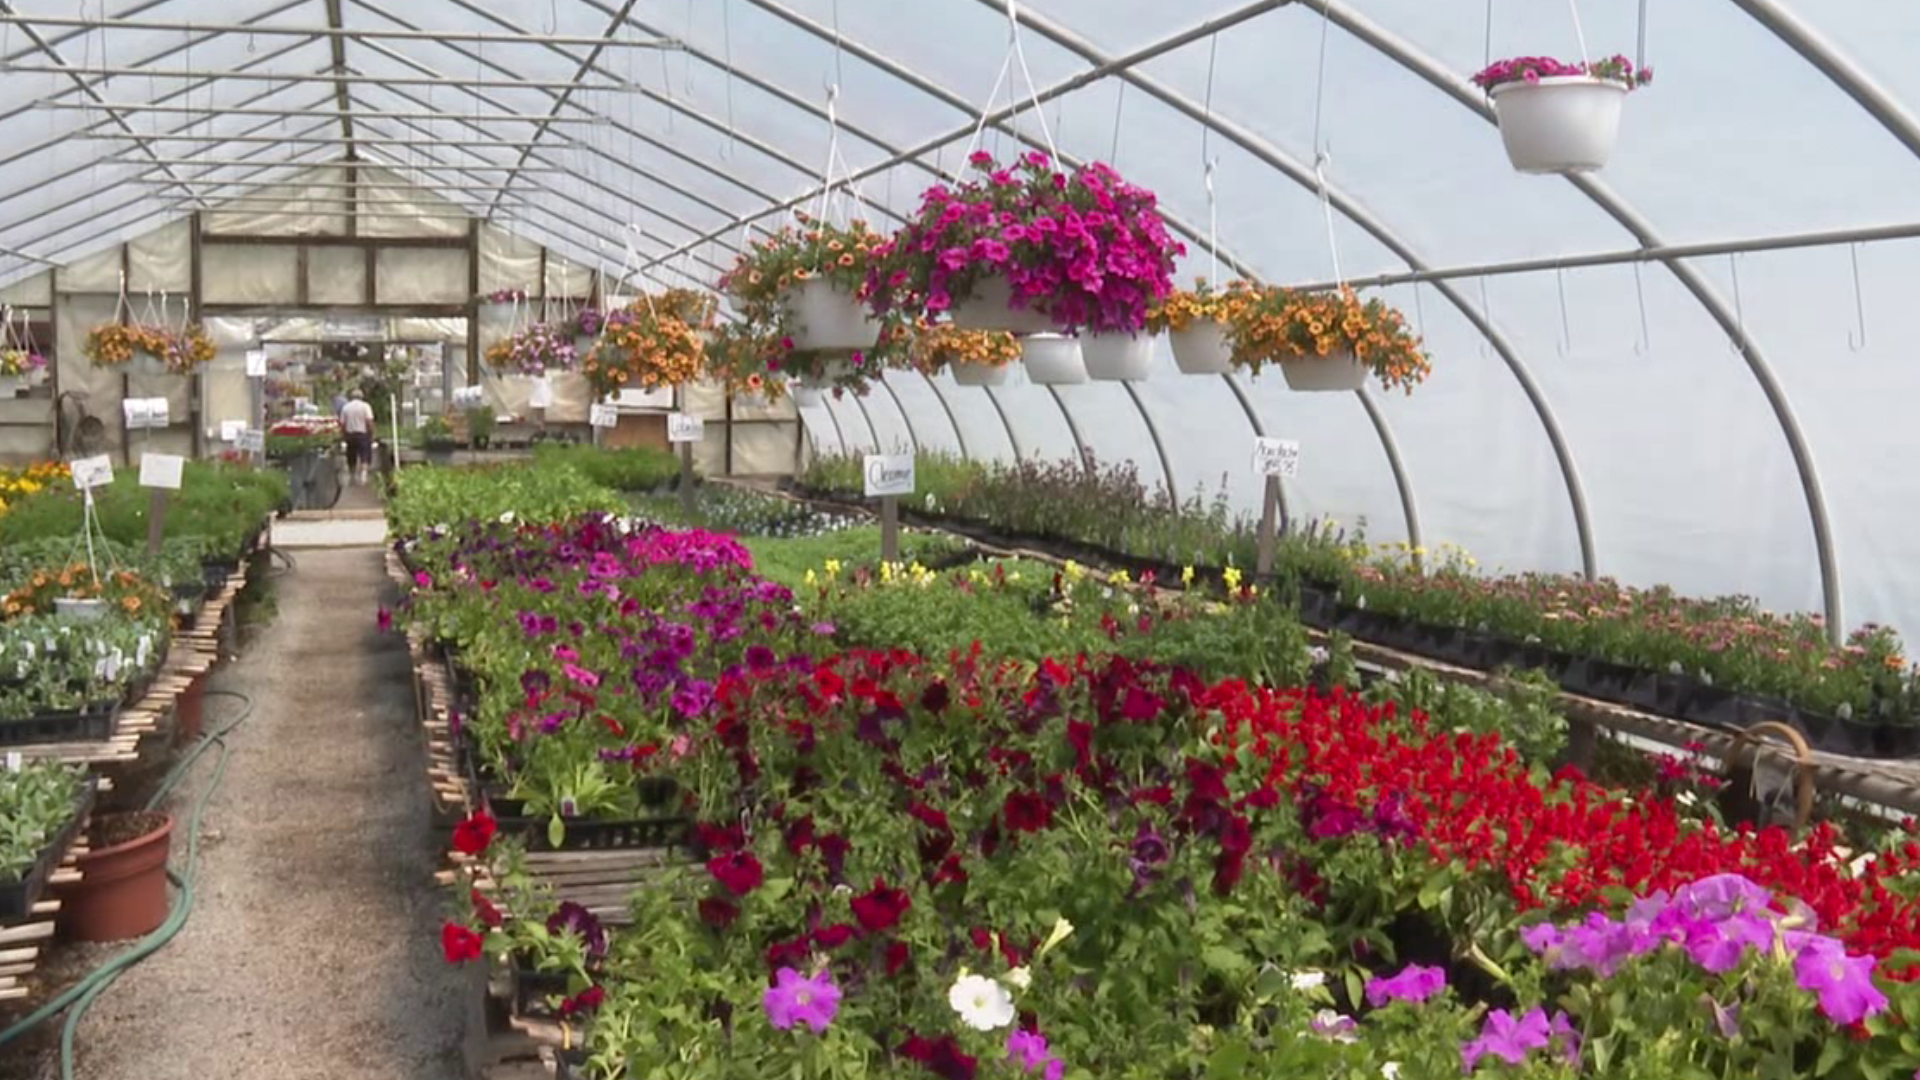 The nursery wants to see healthy growth in the lives of veterans and first responders.